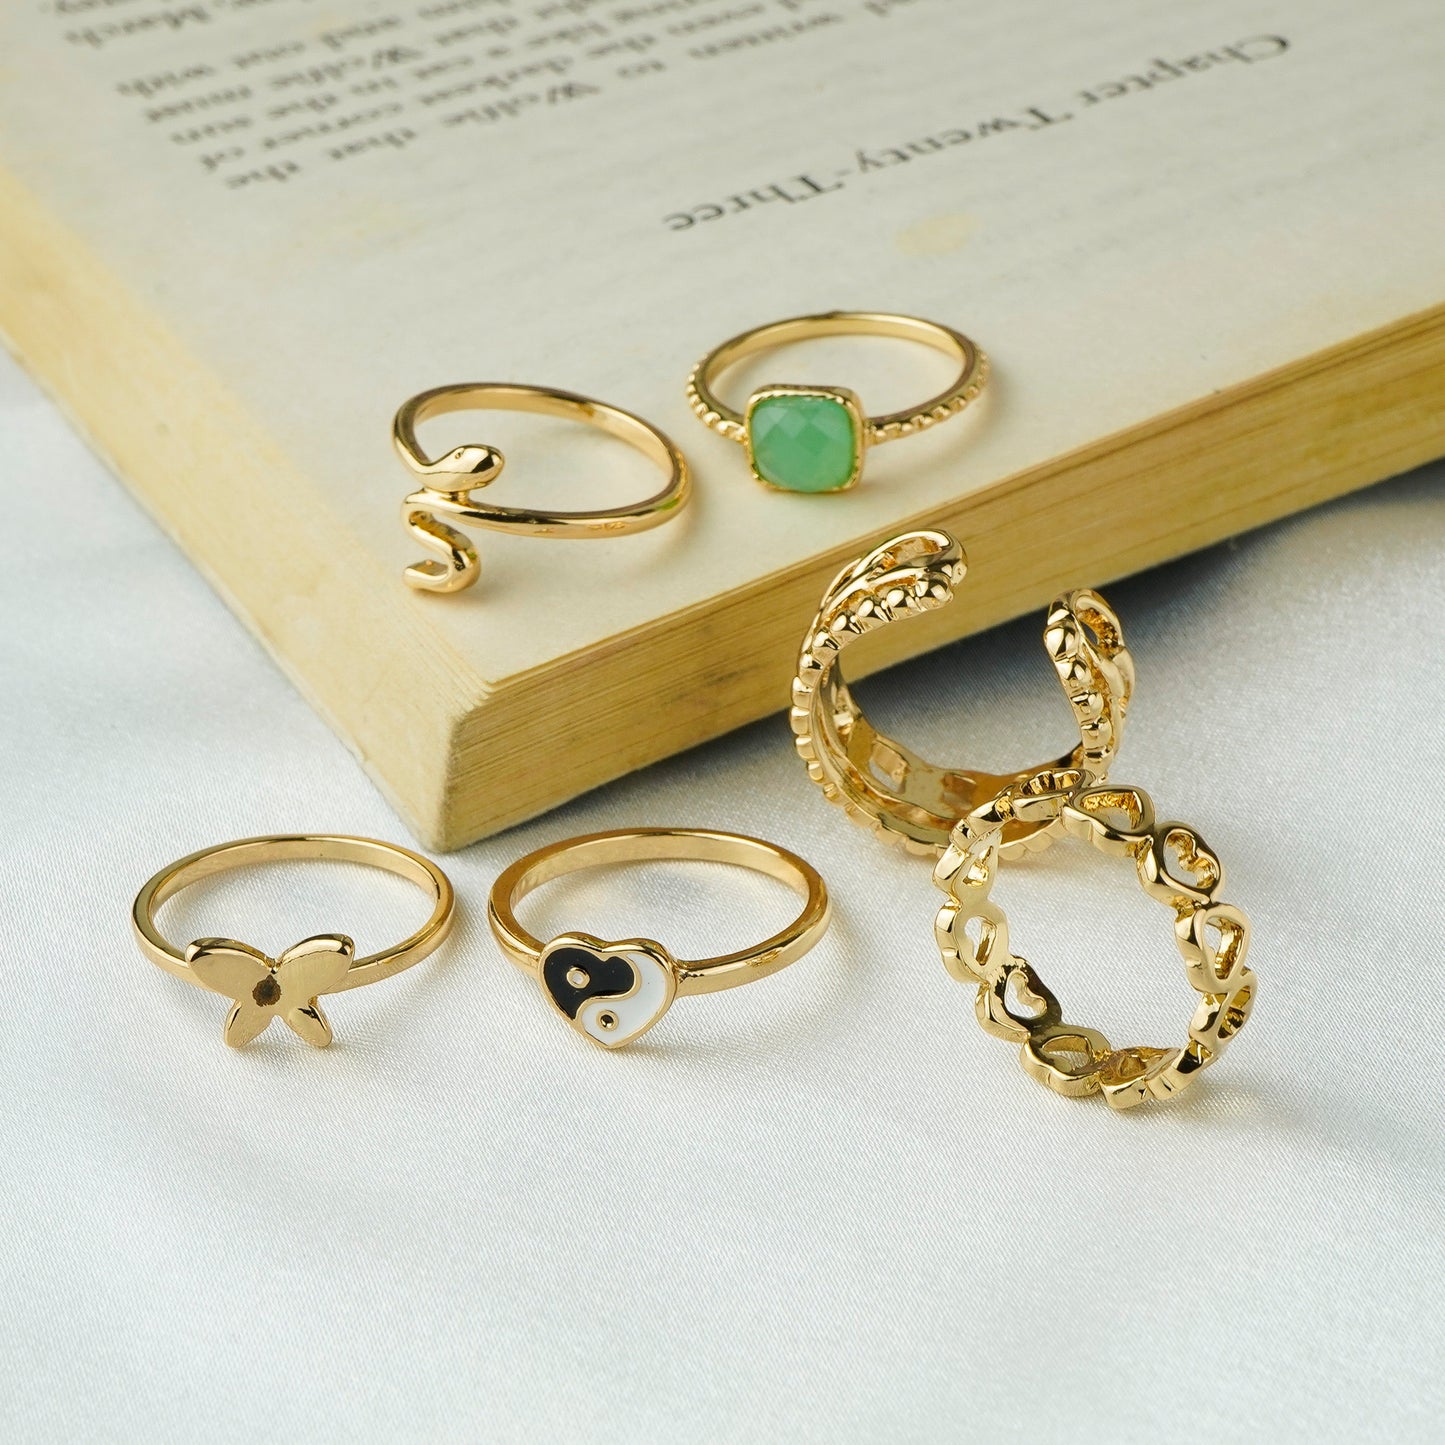 Trendy Set Ring For Fashionable Women(Code:R52)